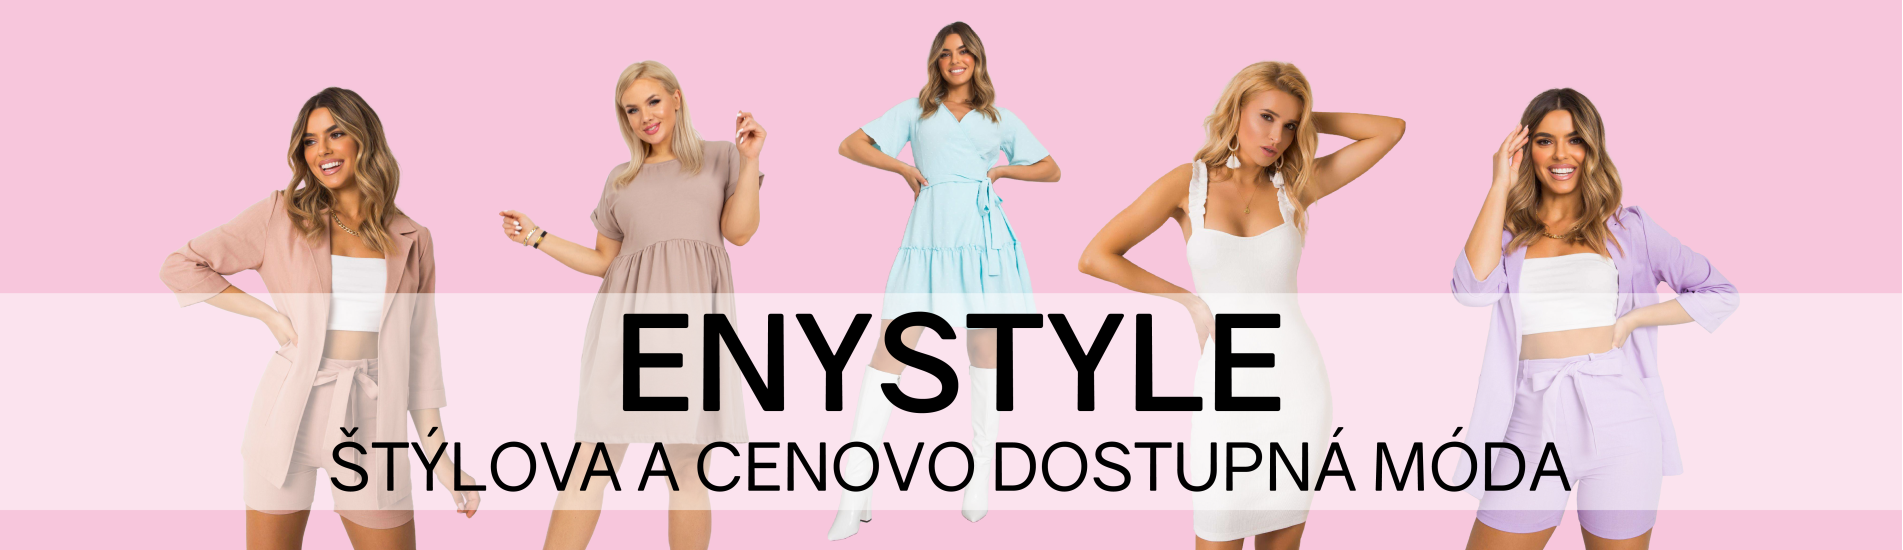 ENYSTYLE